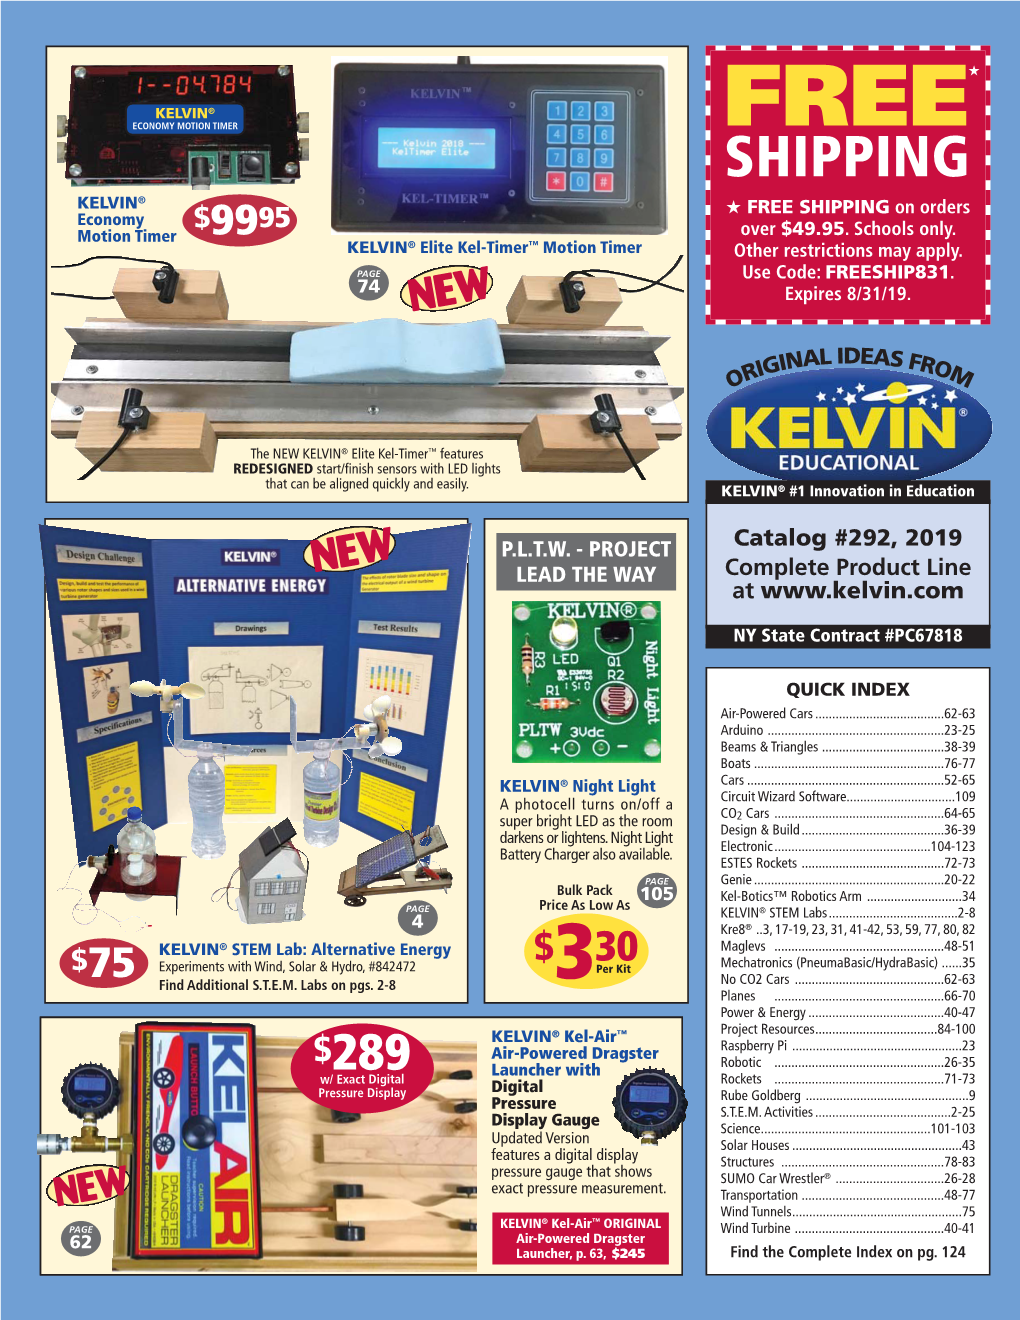 SHIPPING KELVIN® ★ FREE SHIPPING on Orders Economy $ 95 Motion Timer 99 Over $49.95